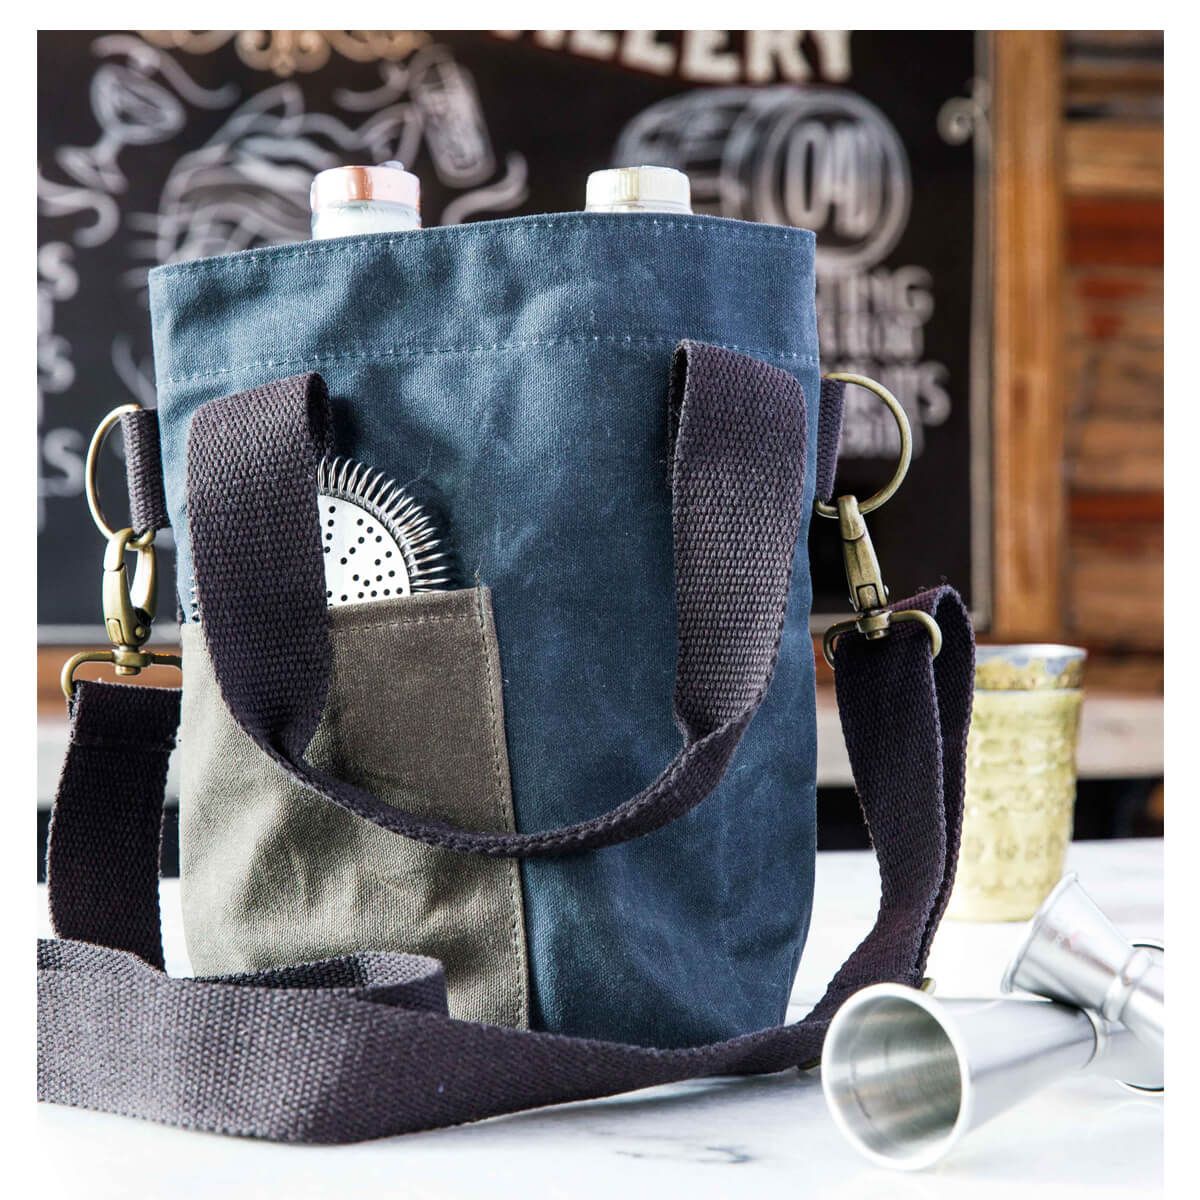 Monogrammed Waxed Canvas Wine Bottle Carrier Tote Bag Picnic Canvas Bag